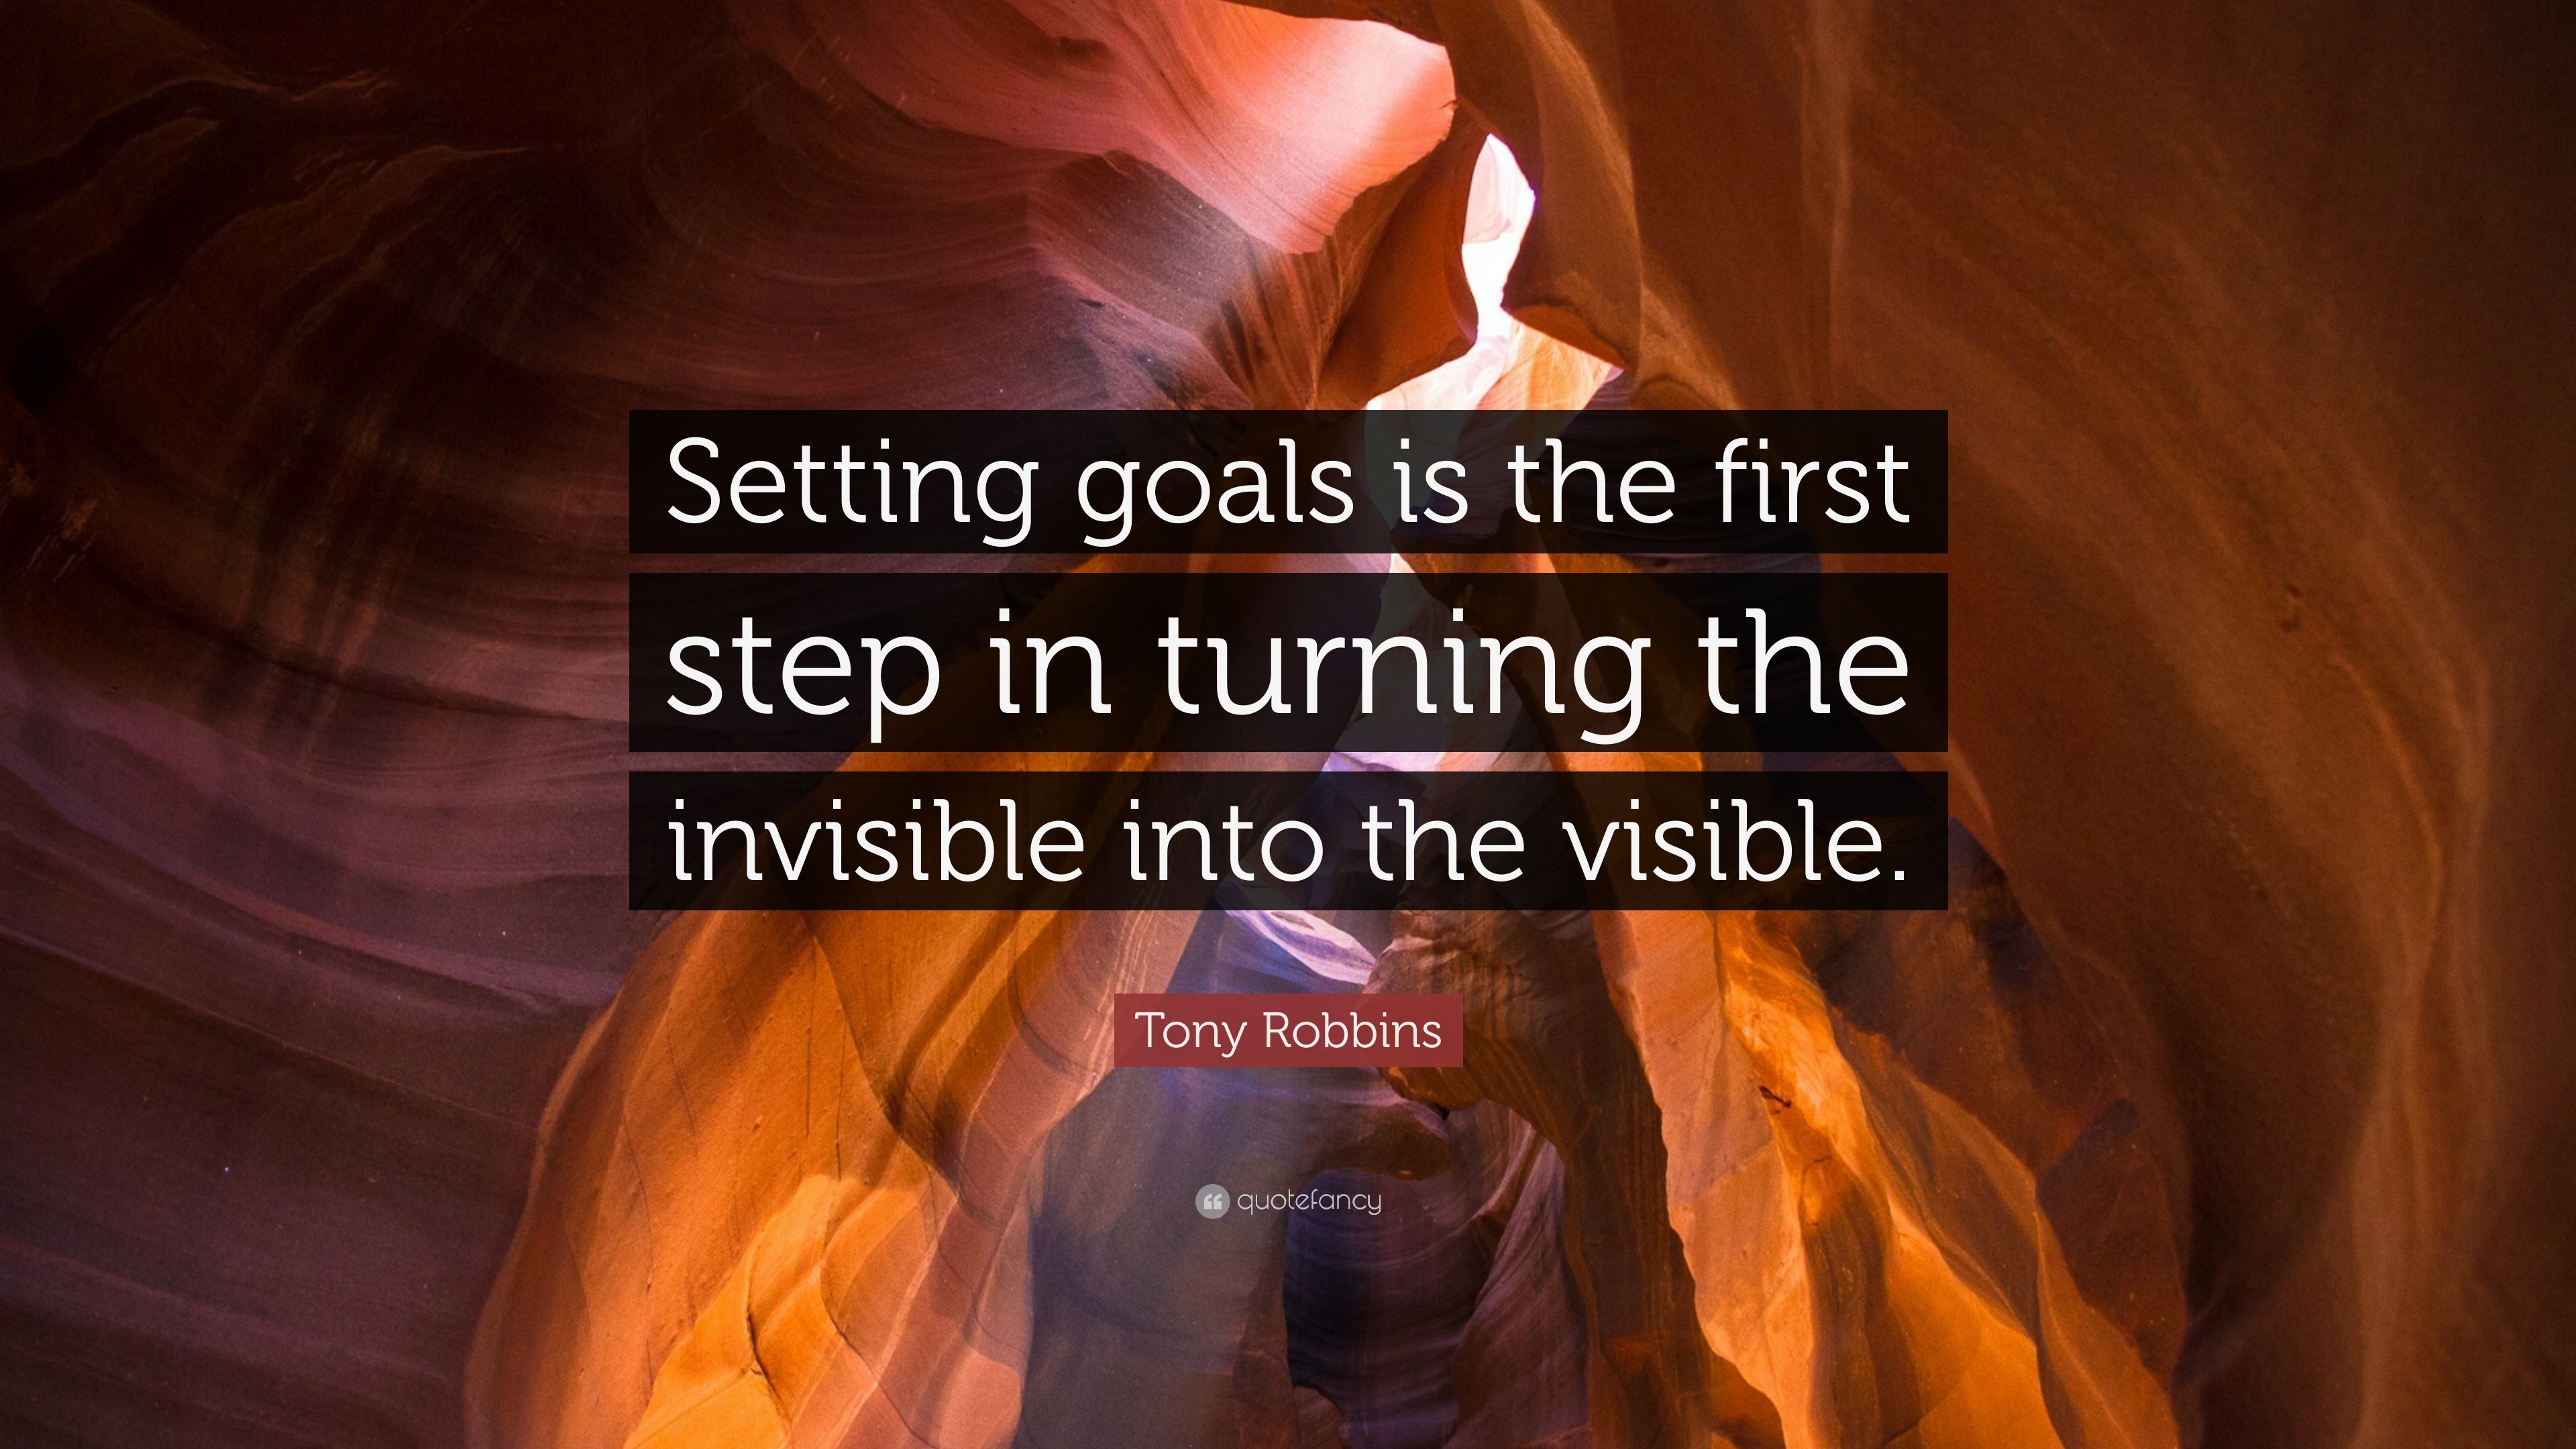 1707018 Tony Robbins Quote Setting goals is the first step in turning the